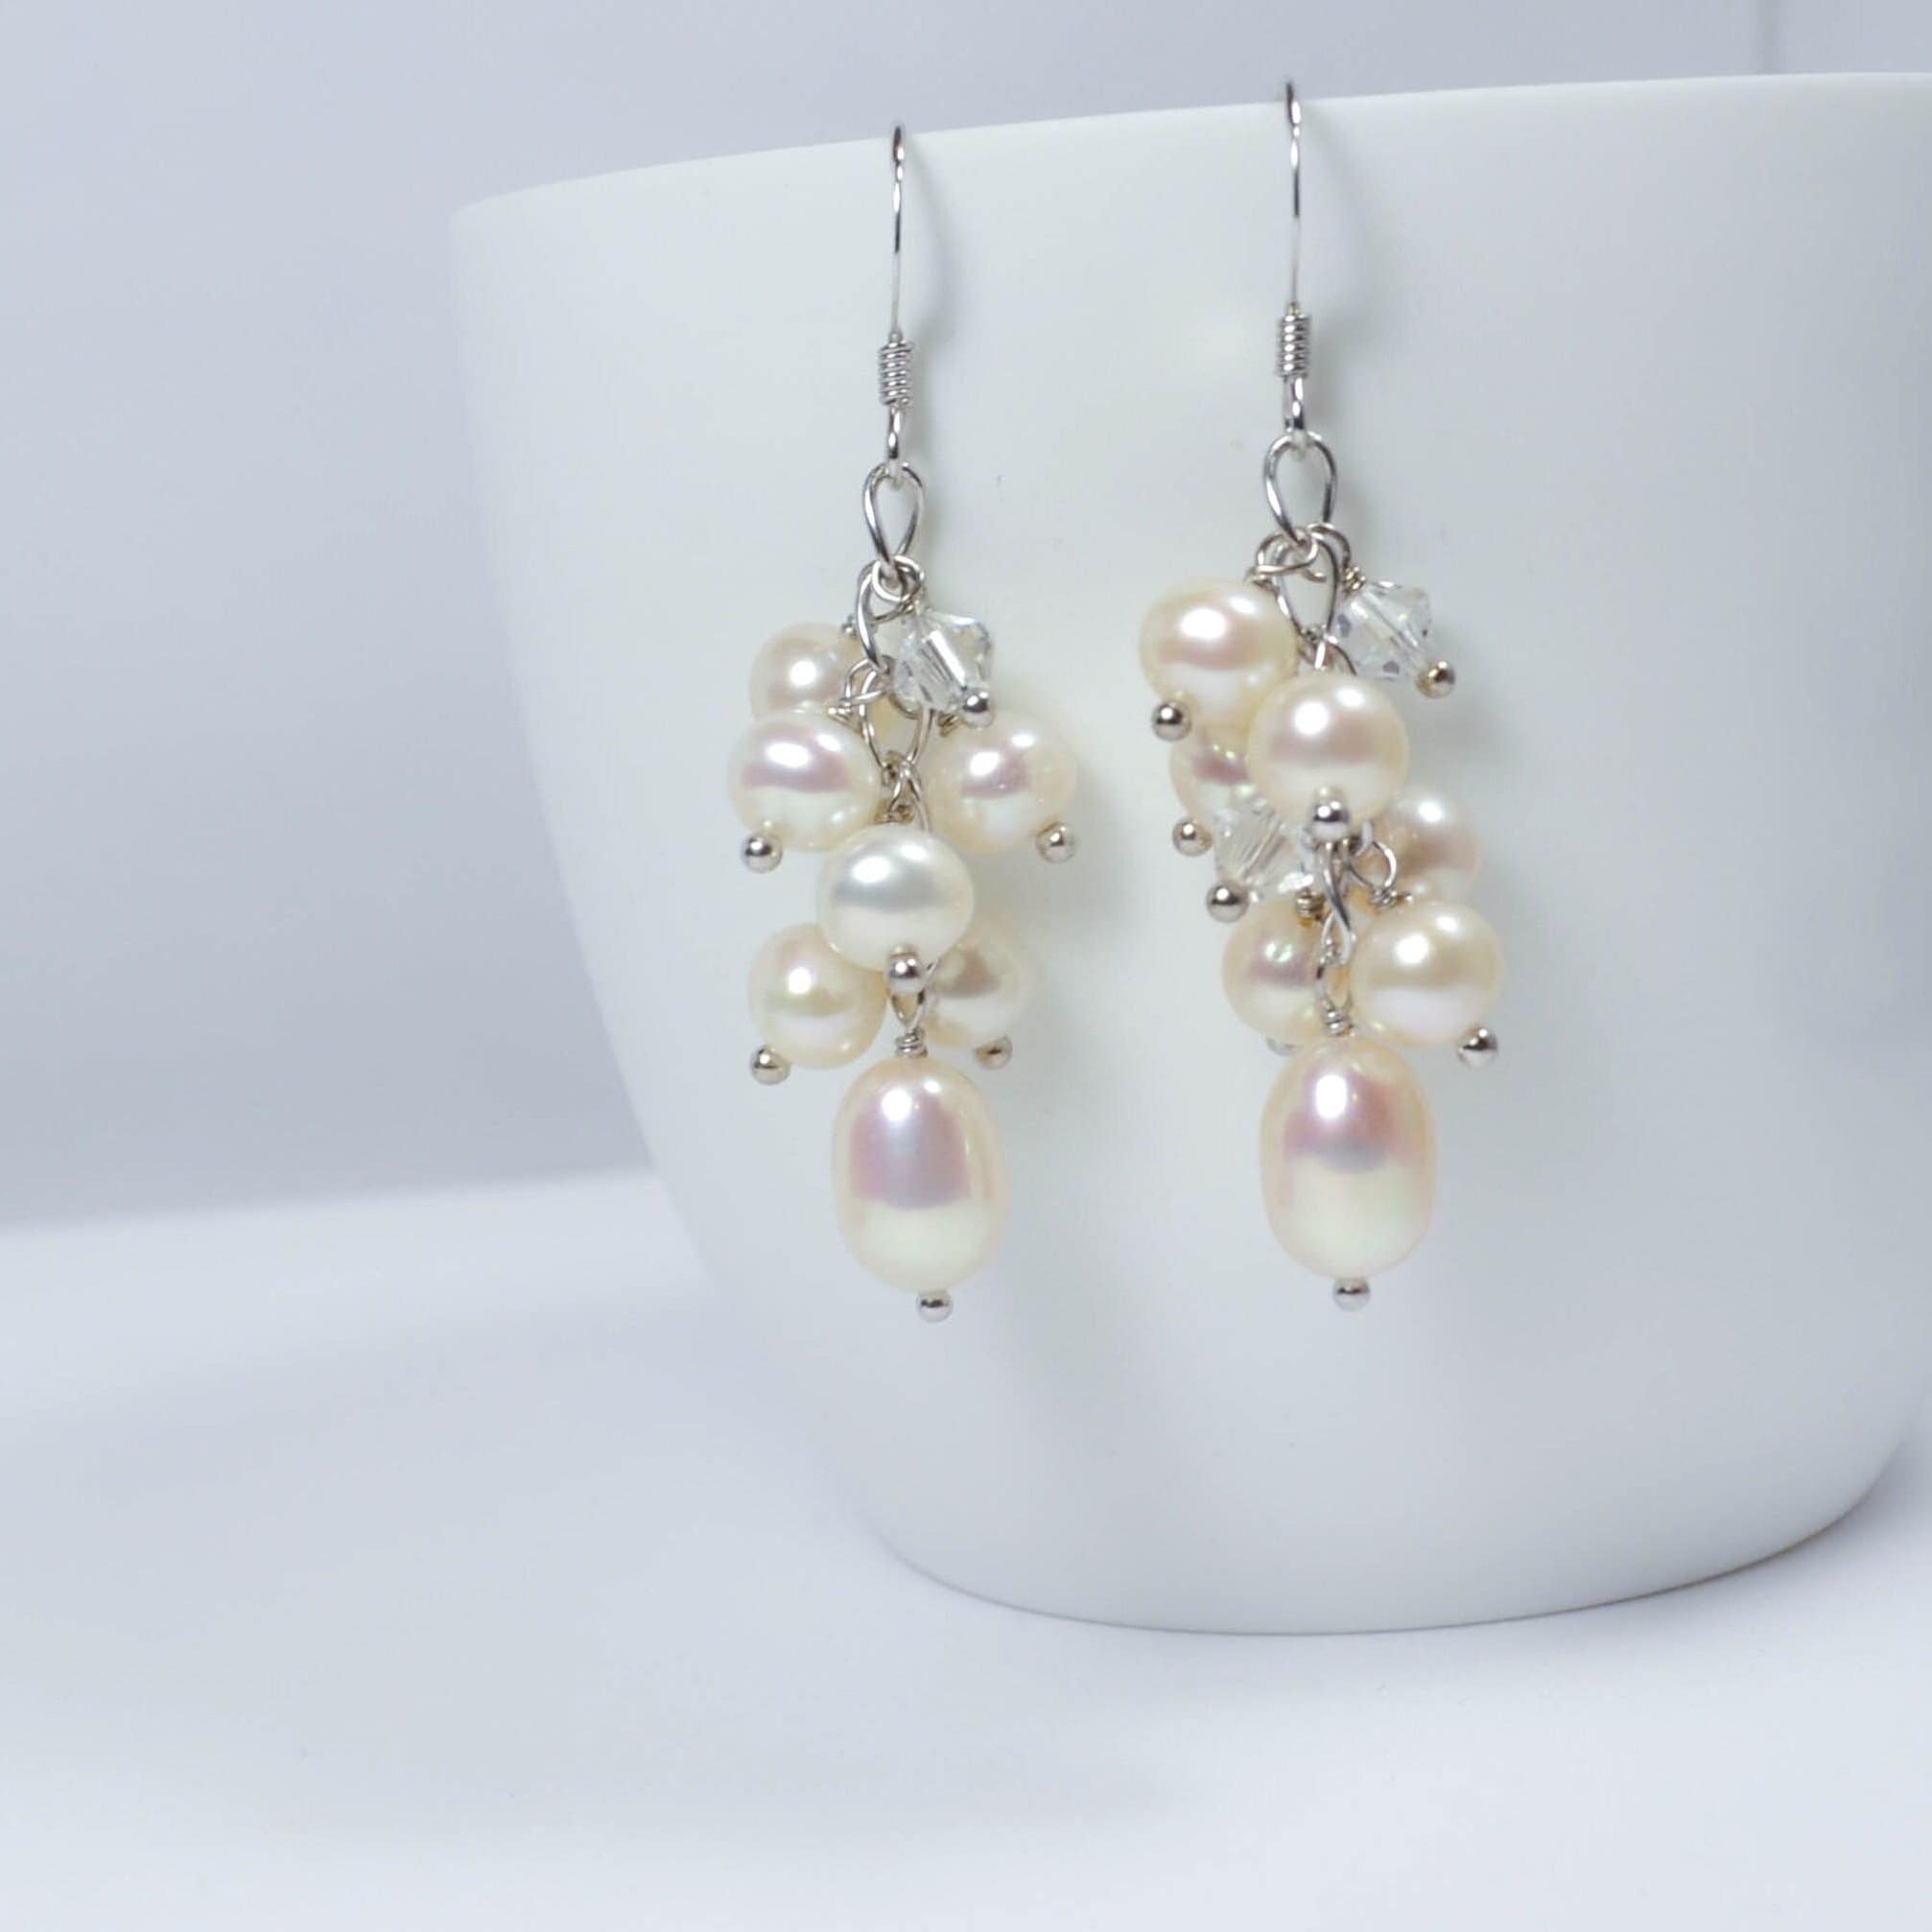 Long Crystal and Freshwater Pearl Cluster Earrings in Gold Filled or Sterling Silver, Swarovski Crystal and Natural and Real Pearl Earrings